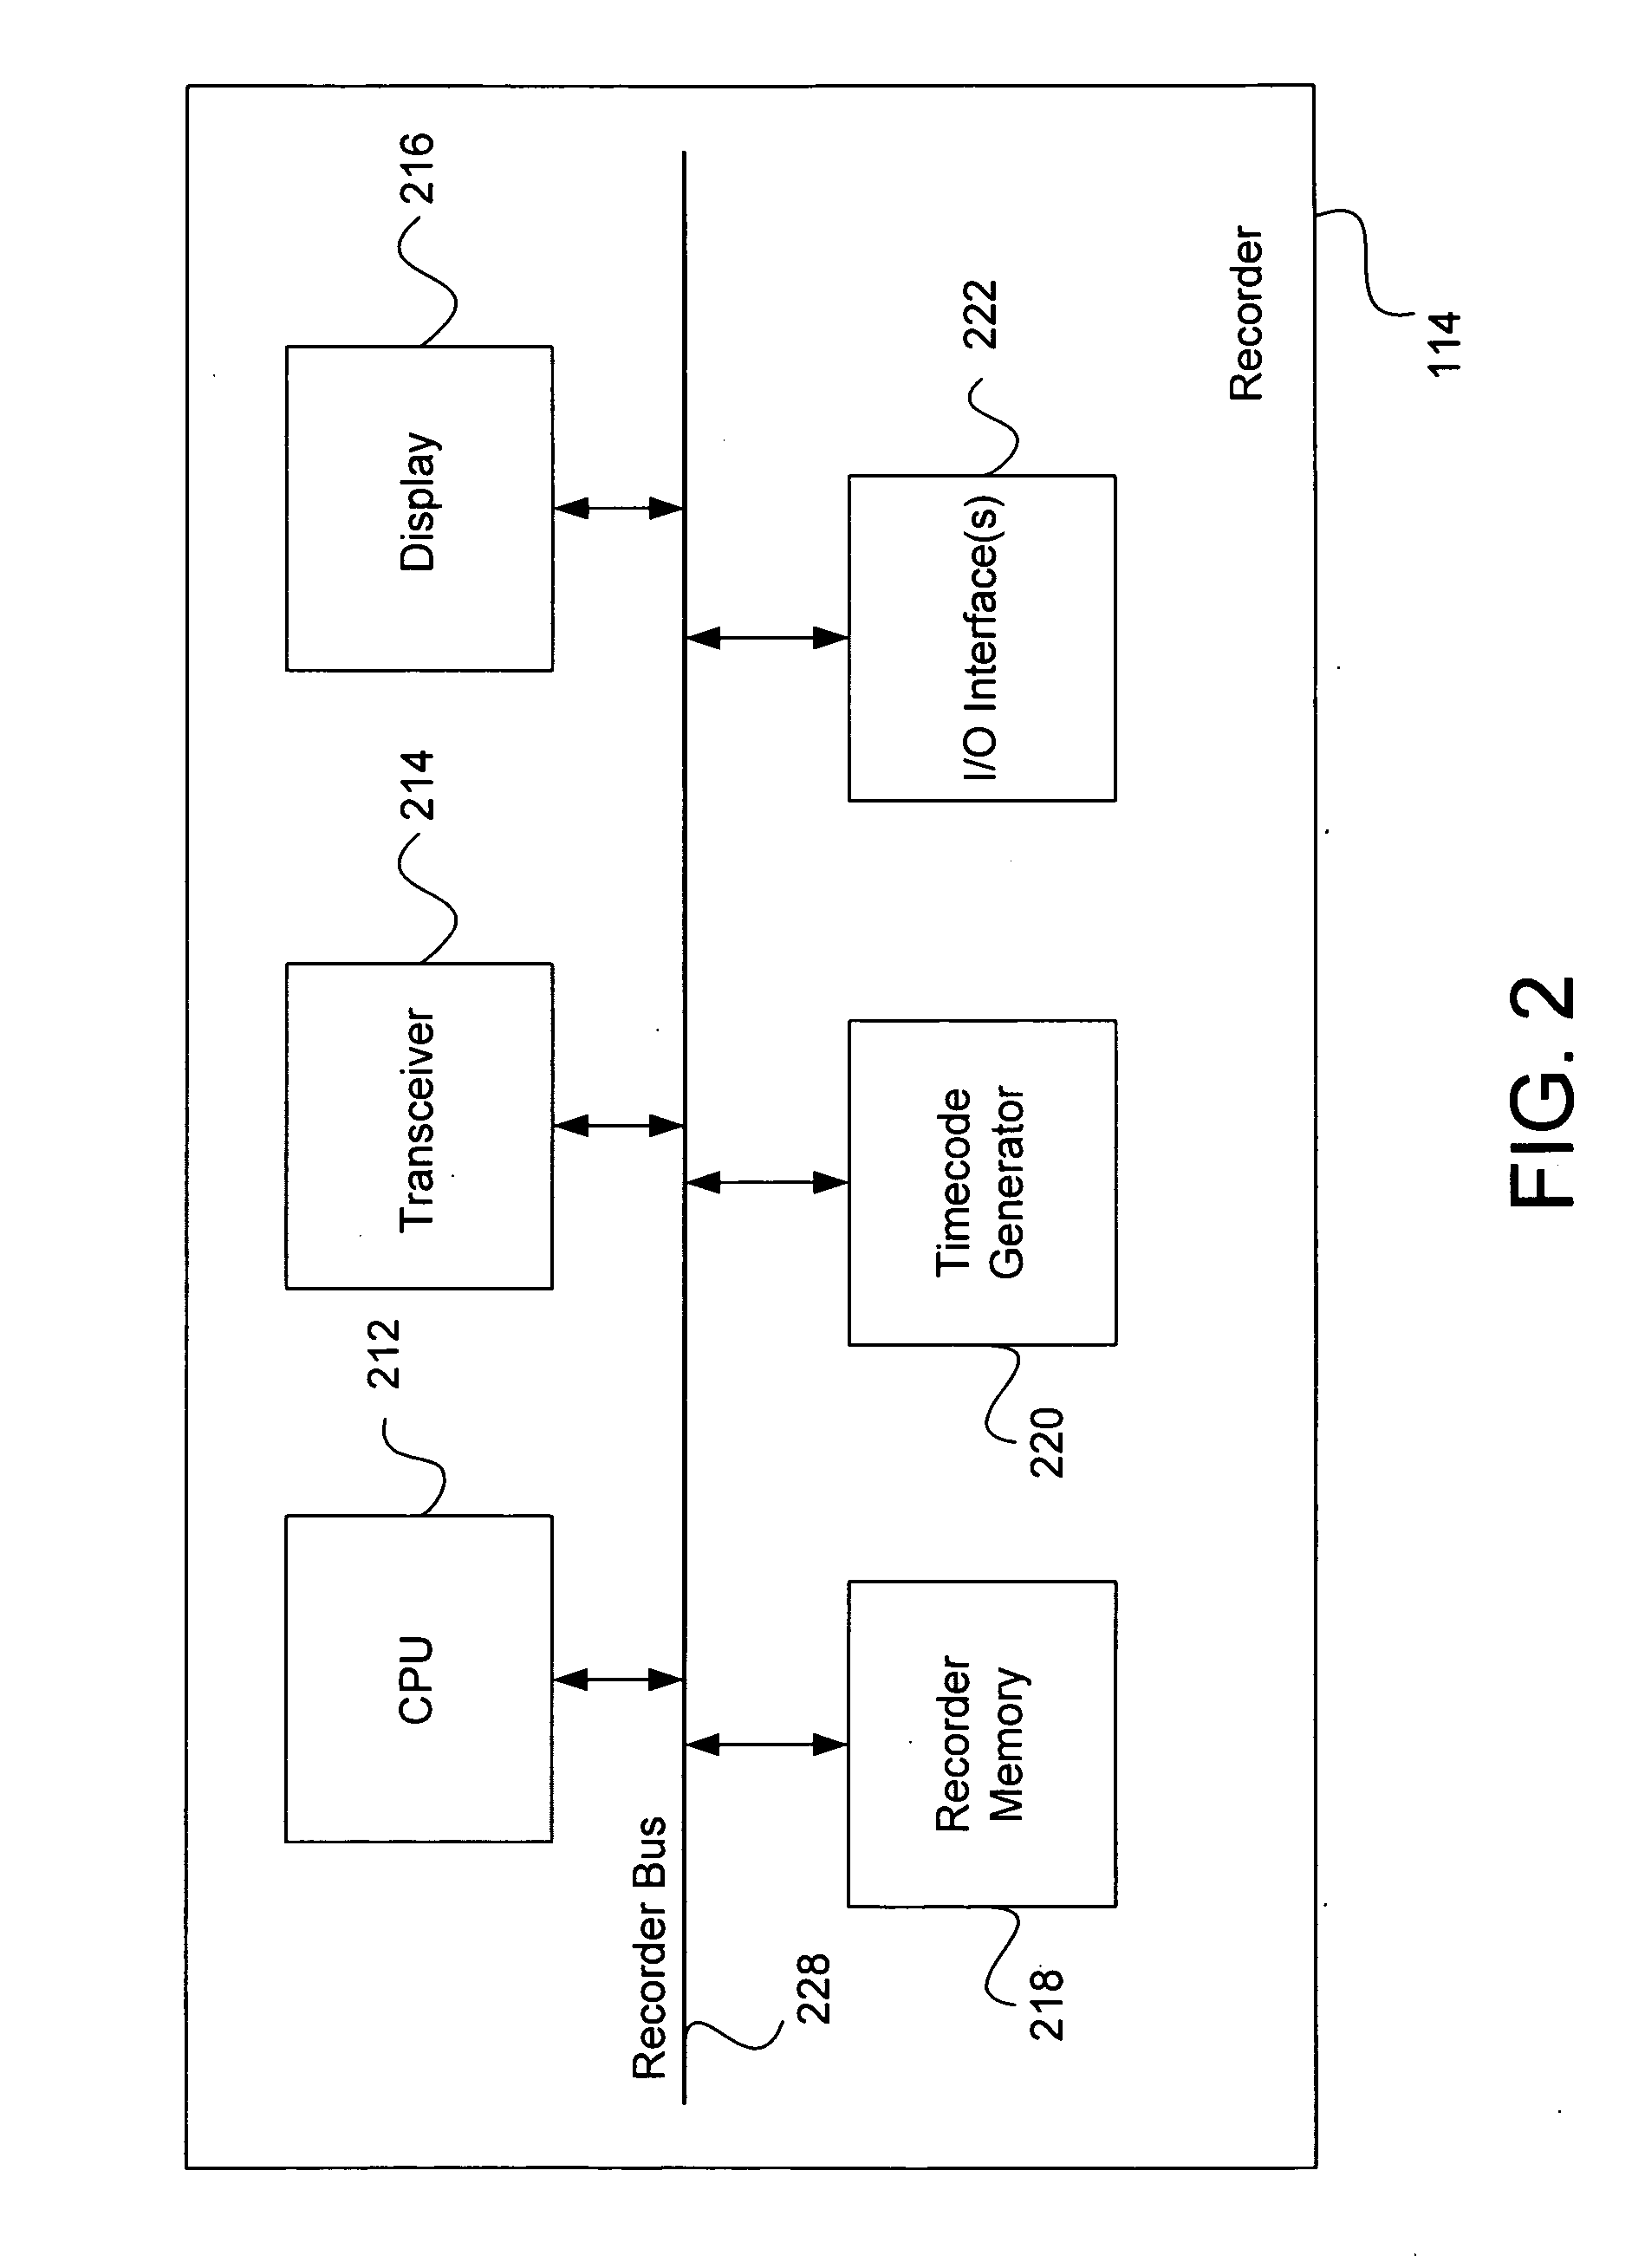 System and method for effectively utilizing a recorder device